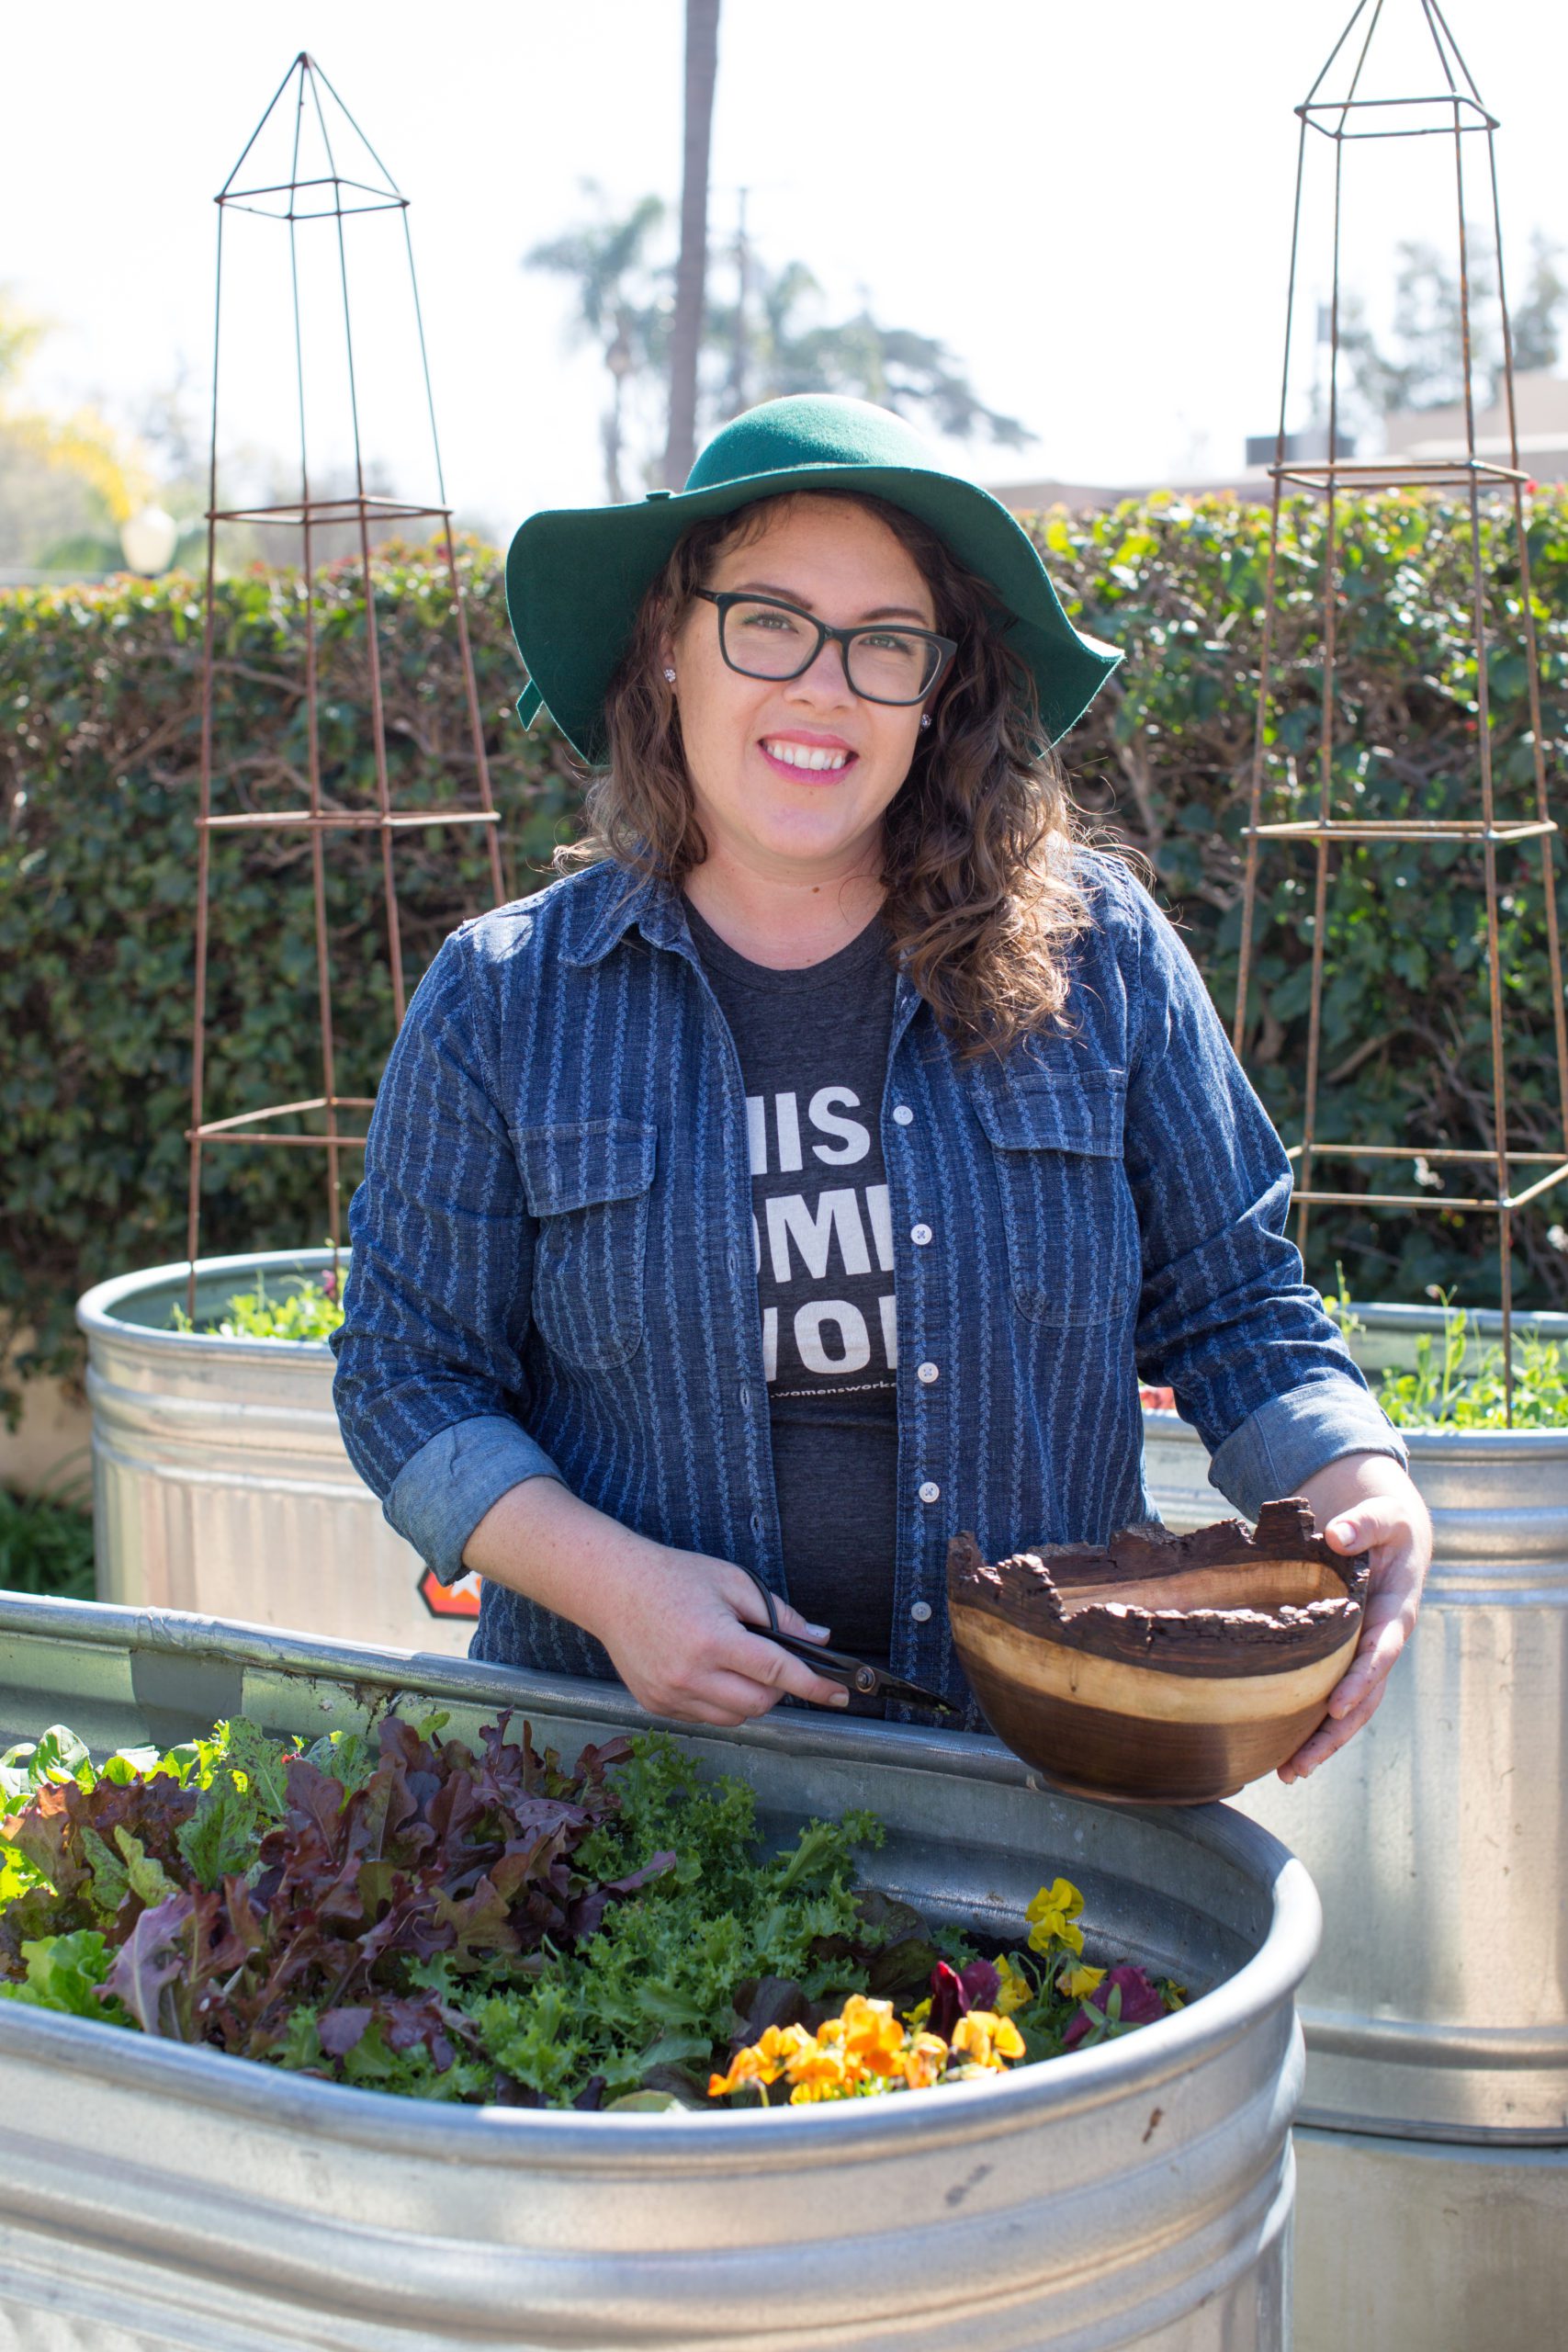 Ashley Irene, founder of Heirloom Potager in a clients culinary garden holding a bowl of garden fresh produce